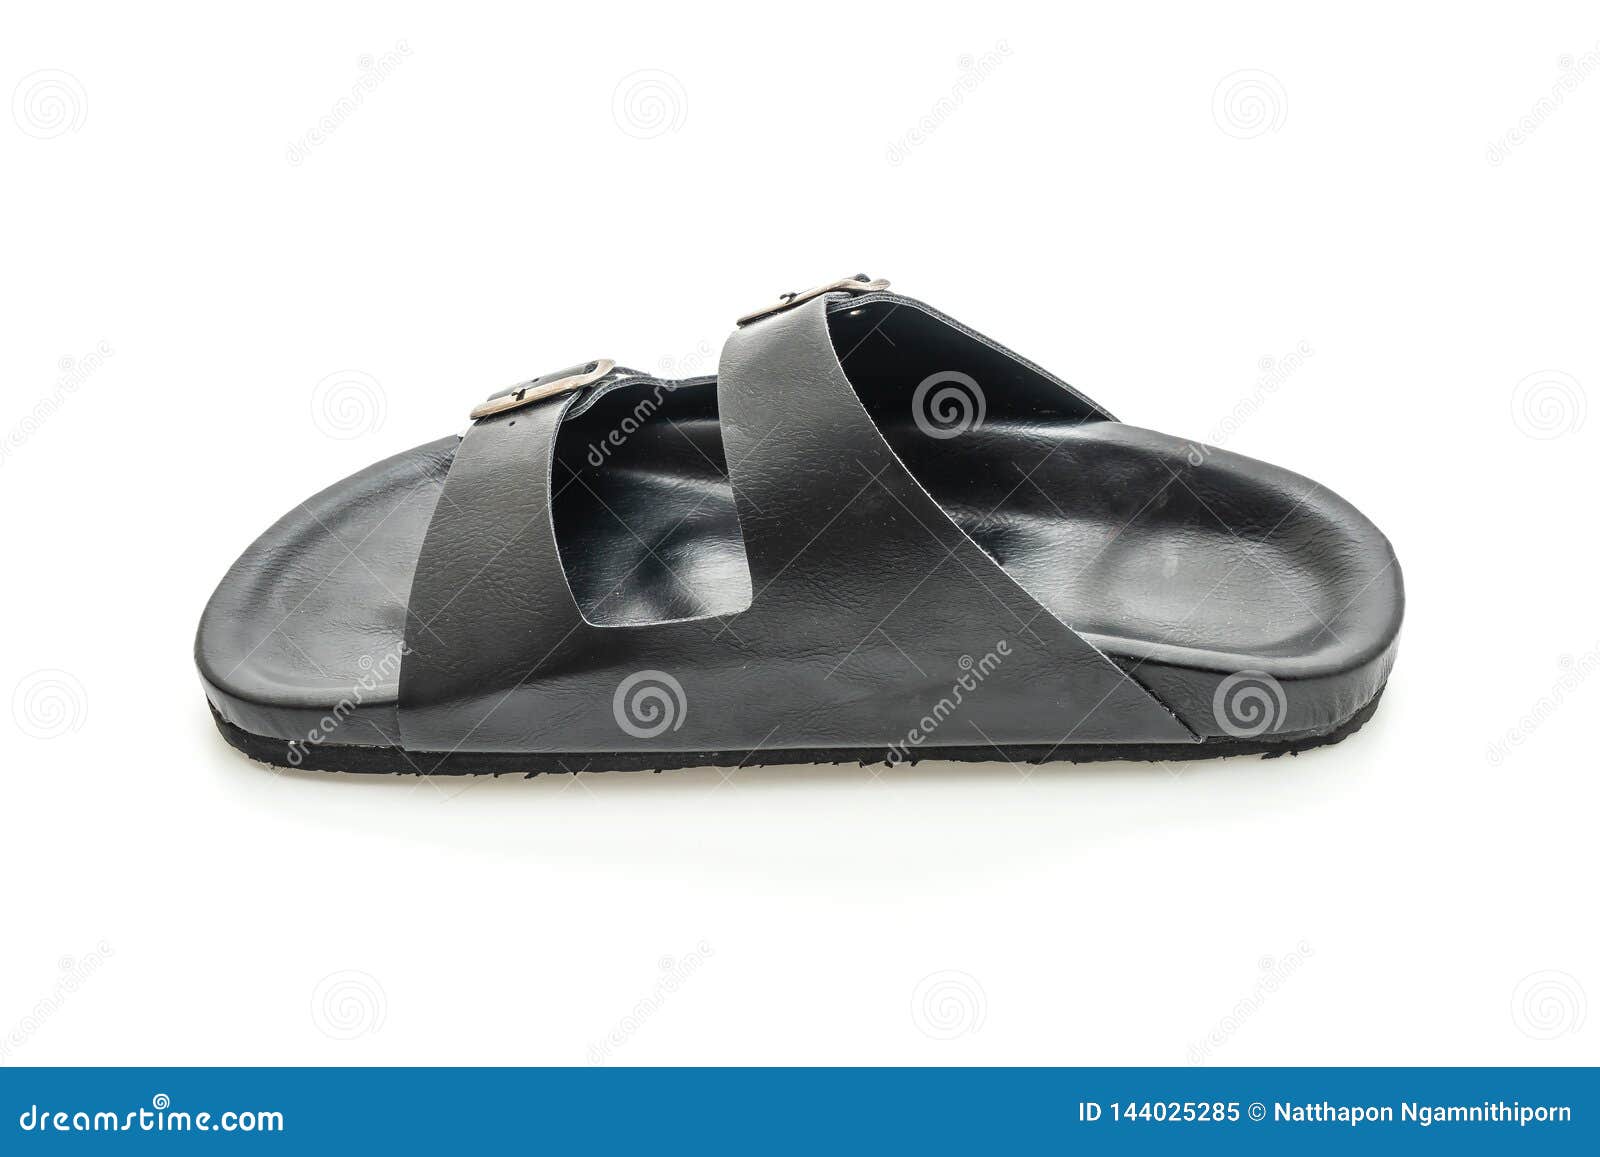 Men leather sandals stock image. Image of male, accessory - 144025285